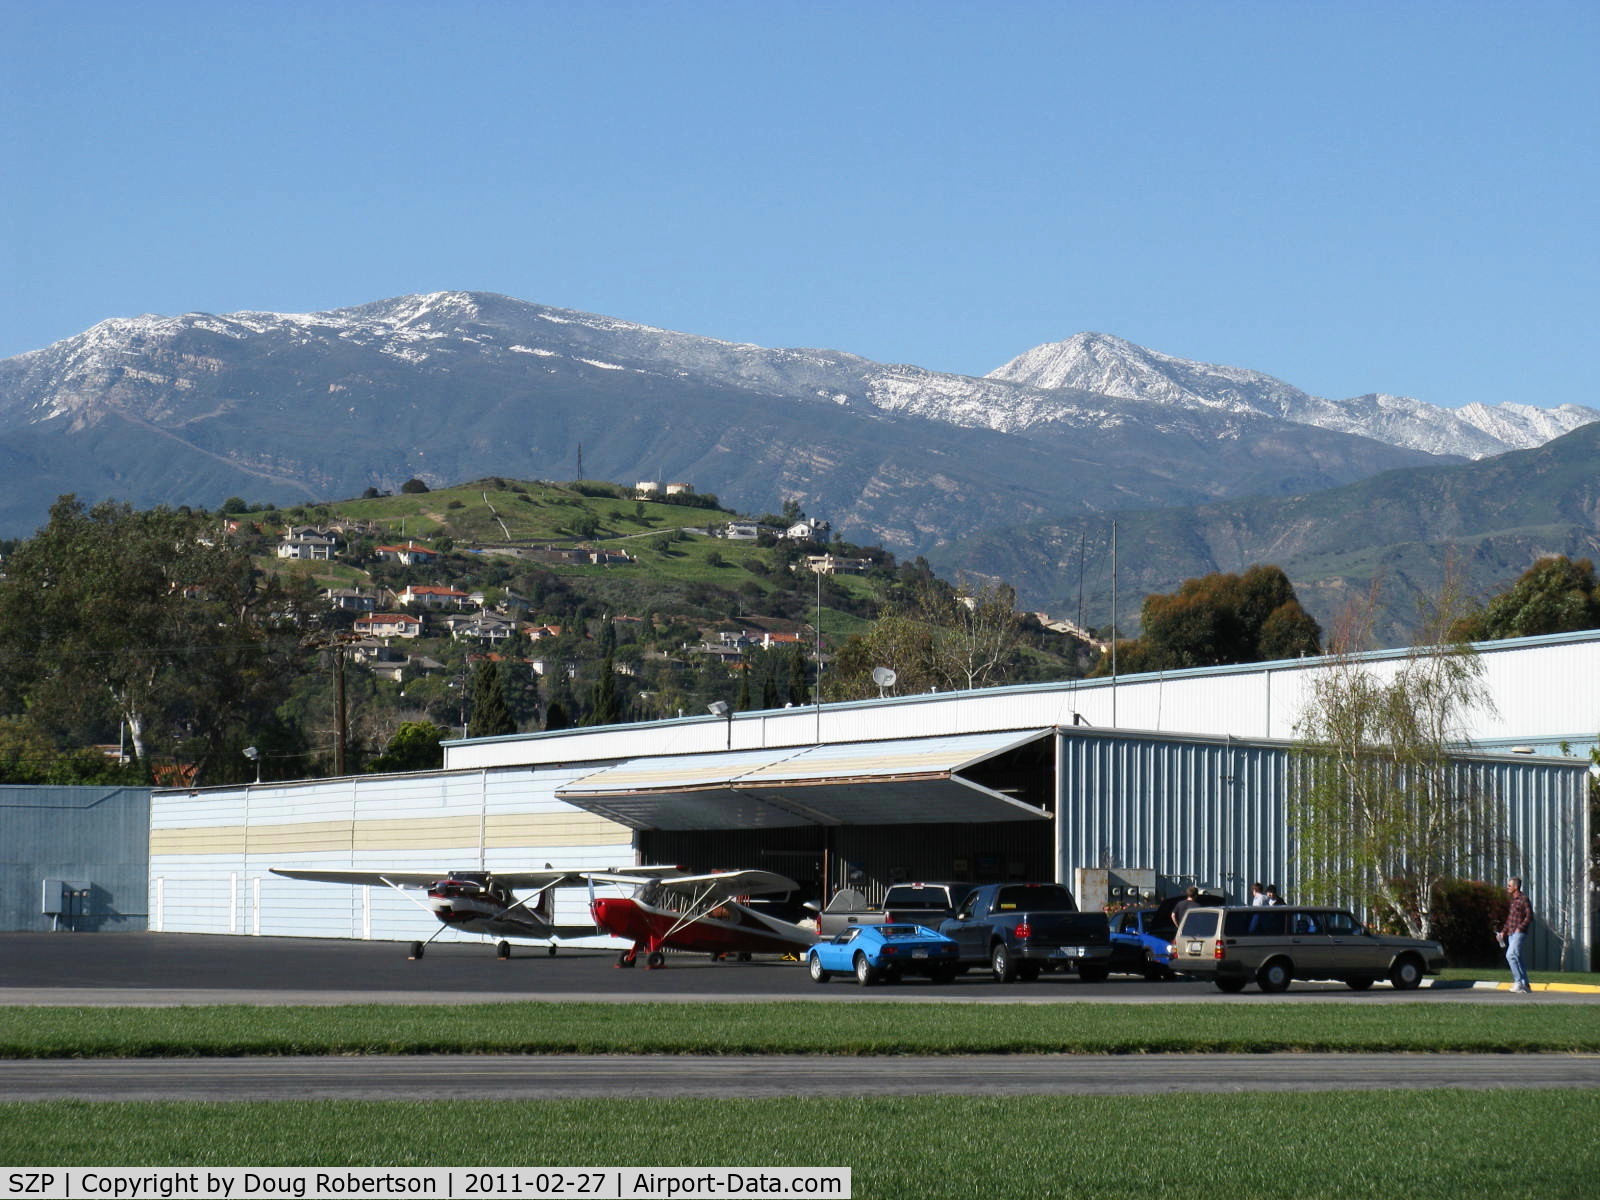 Santa Paula Airport (SZP) - Snow on the mountains North of SZP. 6244 ft. and 6704 ft. MSL